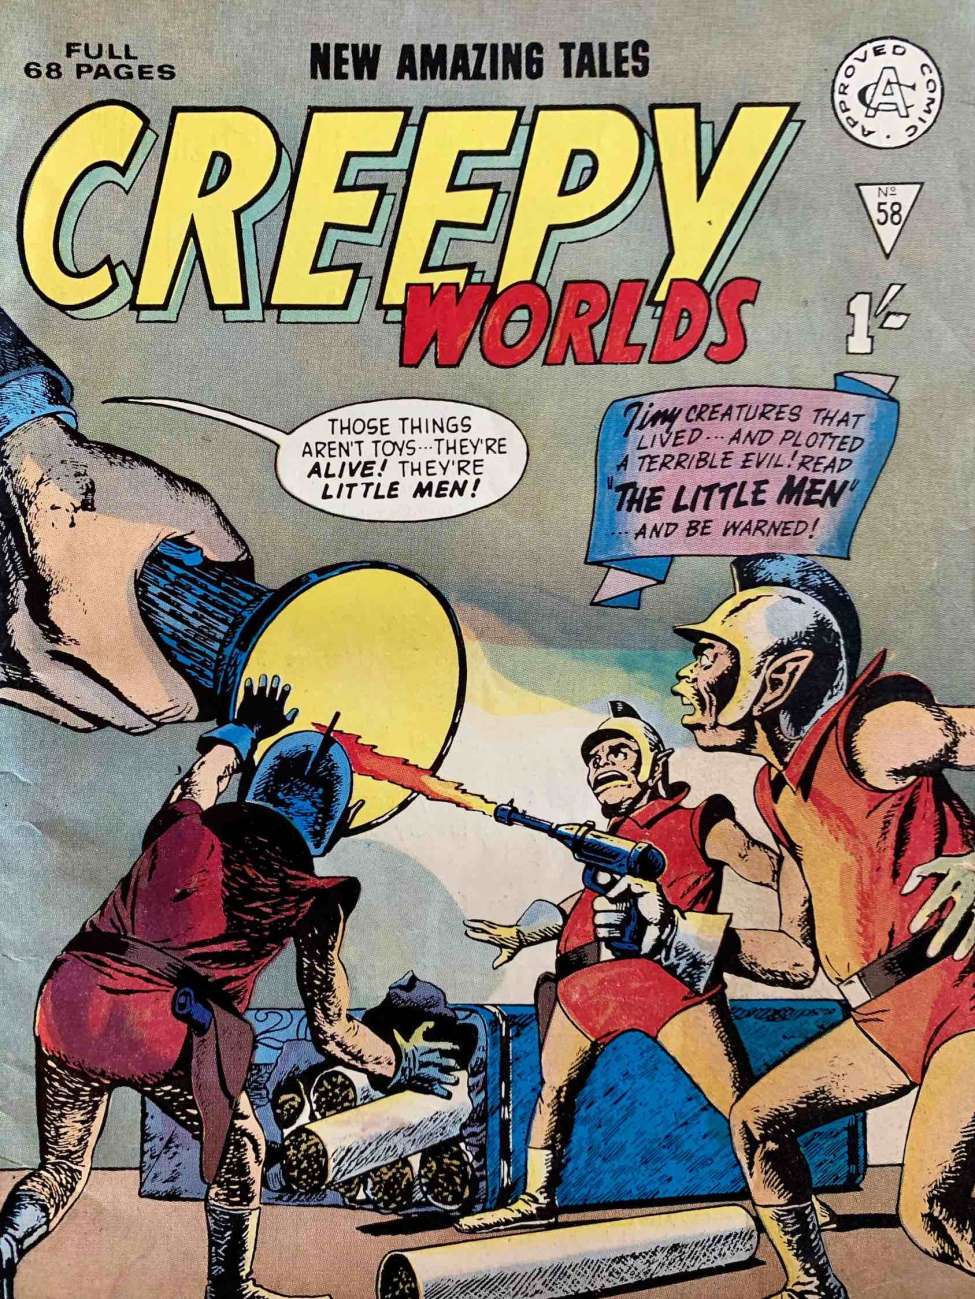 Book Cover For Creepy Worlds 58